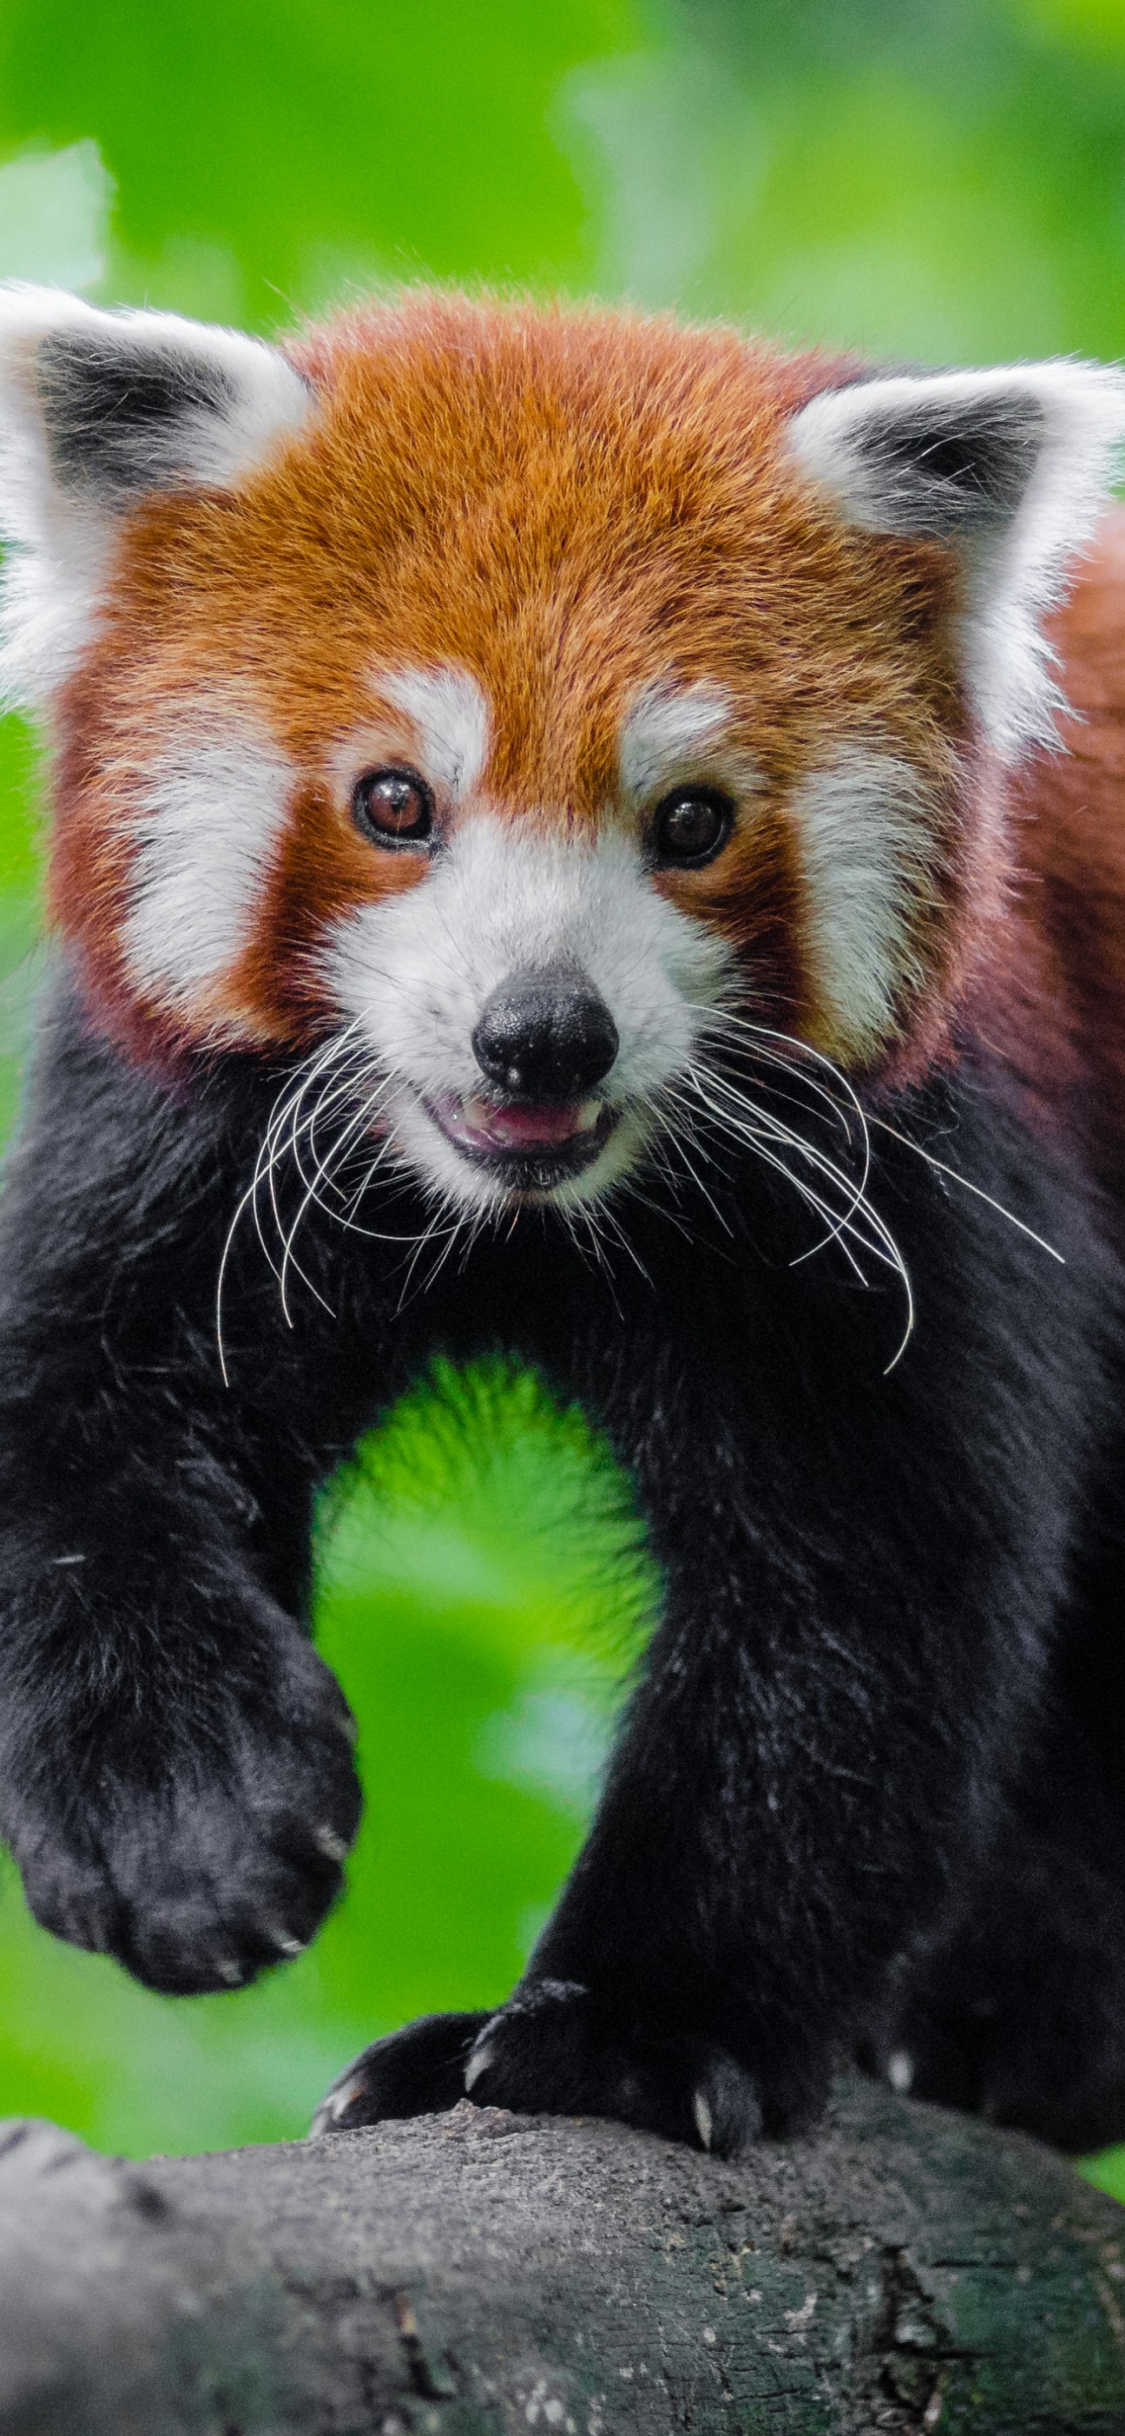 Download wallpaper 1125x2436 cute, red panda, animal, play, iphone x,  1125x2436 hd background, 838